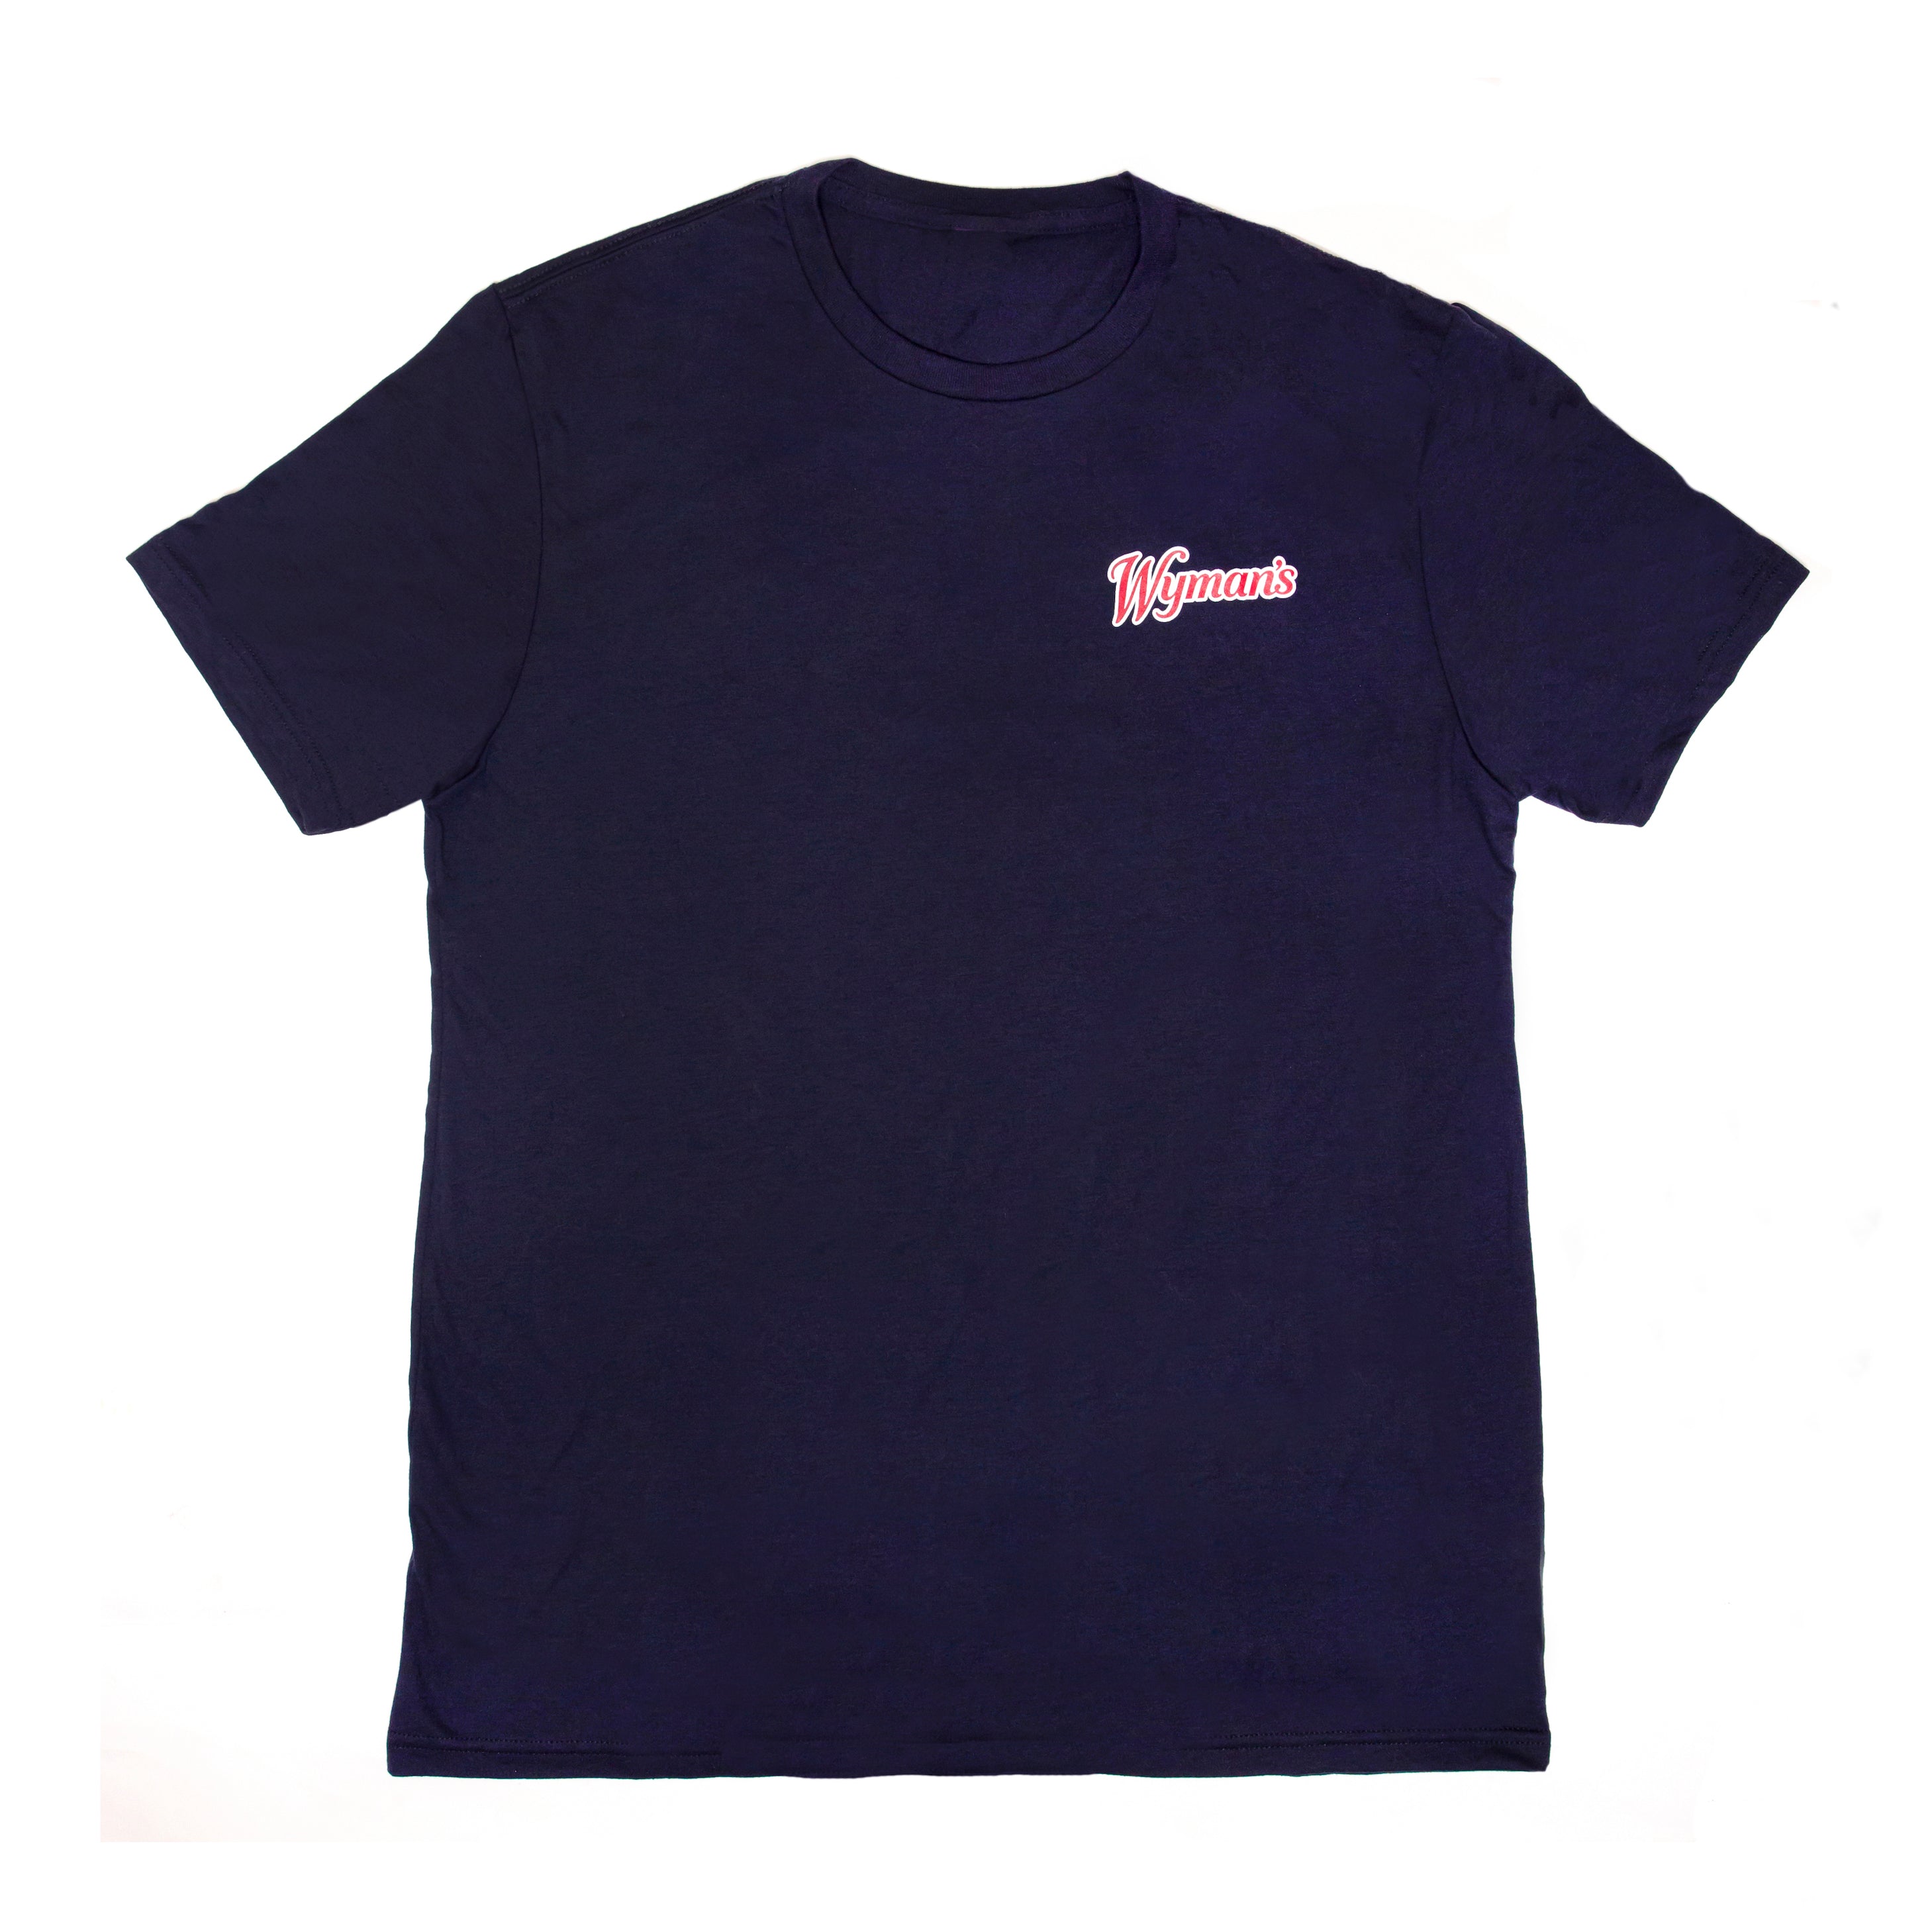 An Whitney Wyman's Rooted in Maine navy t-shirt with a pink logo on it.